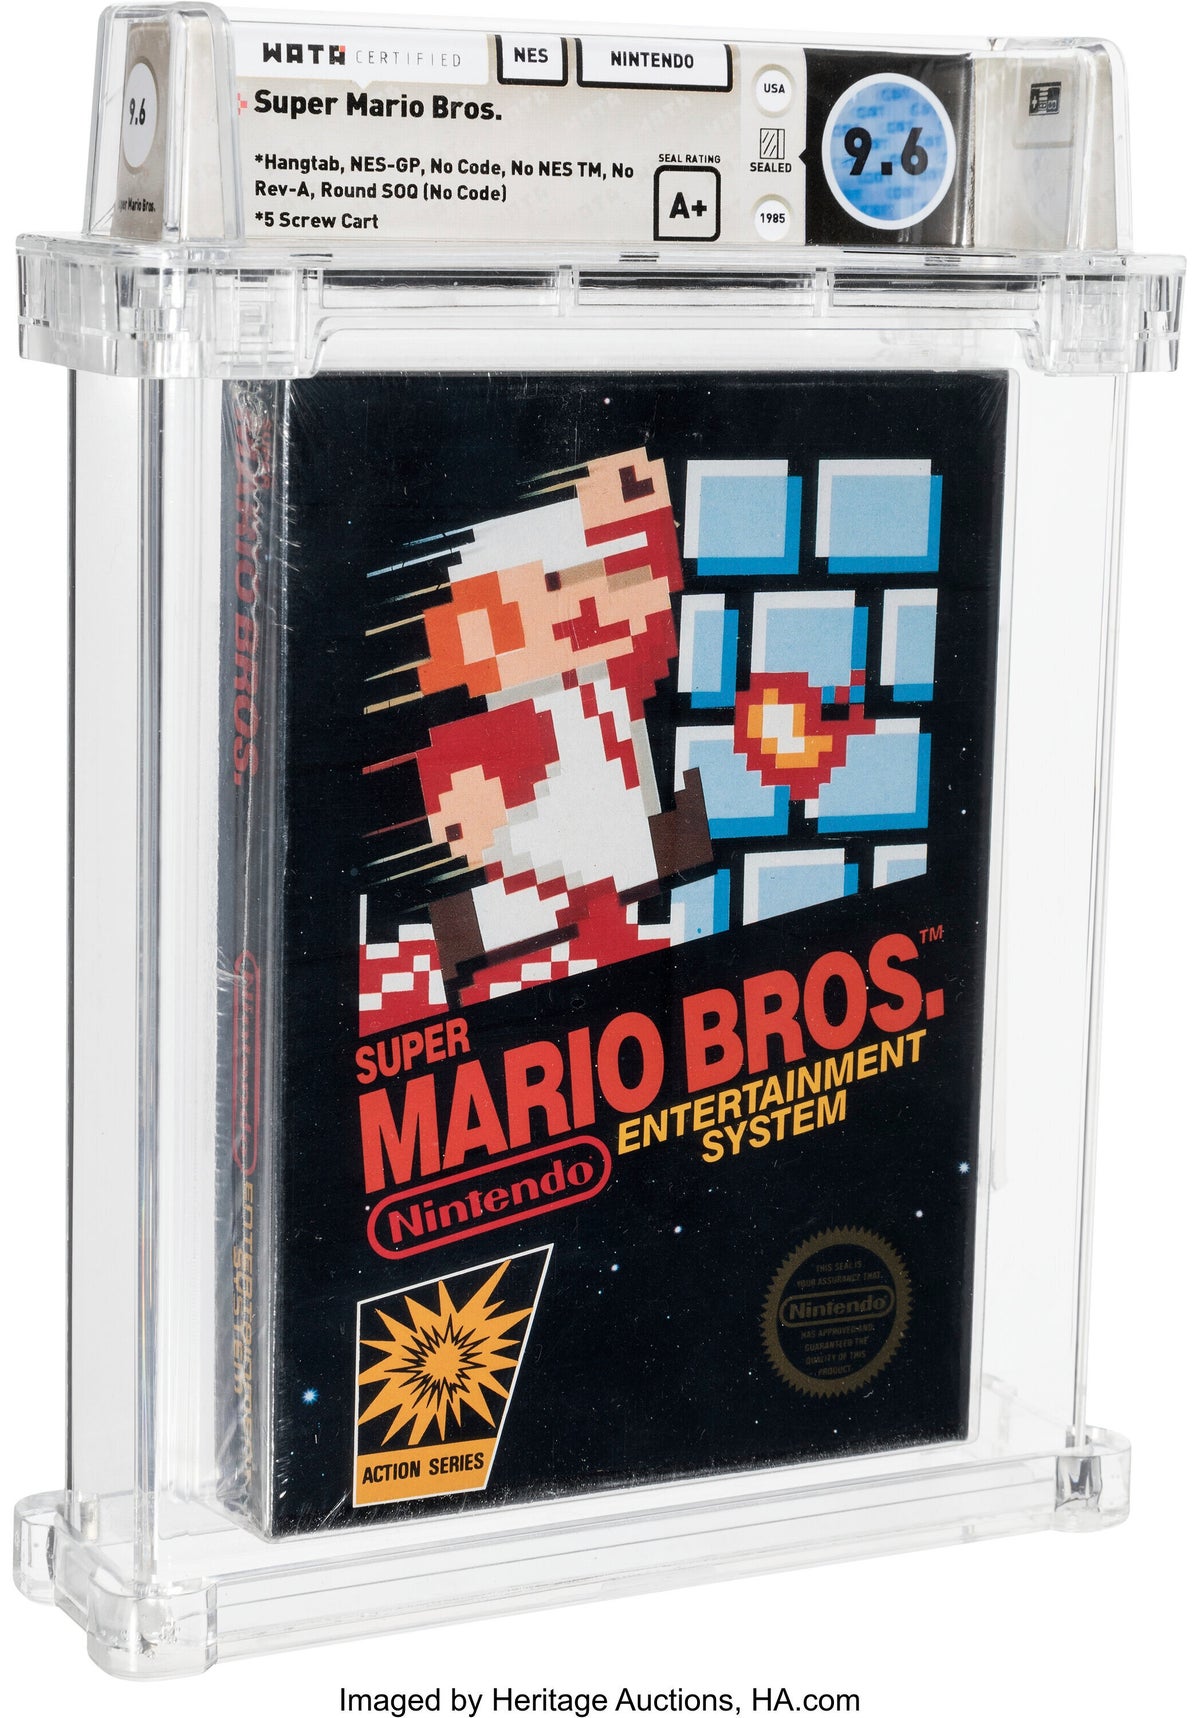 How much is an unopened nes worth 